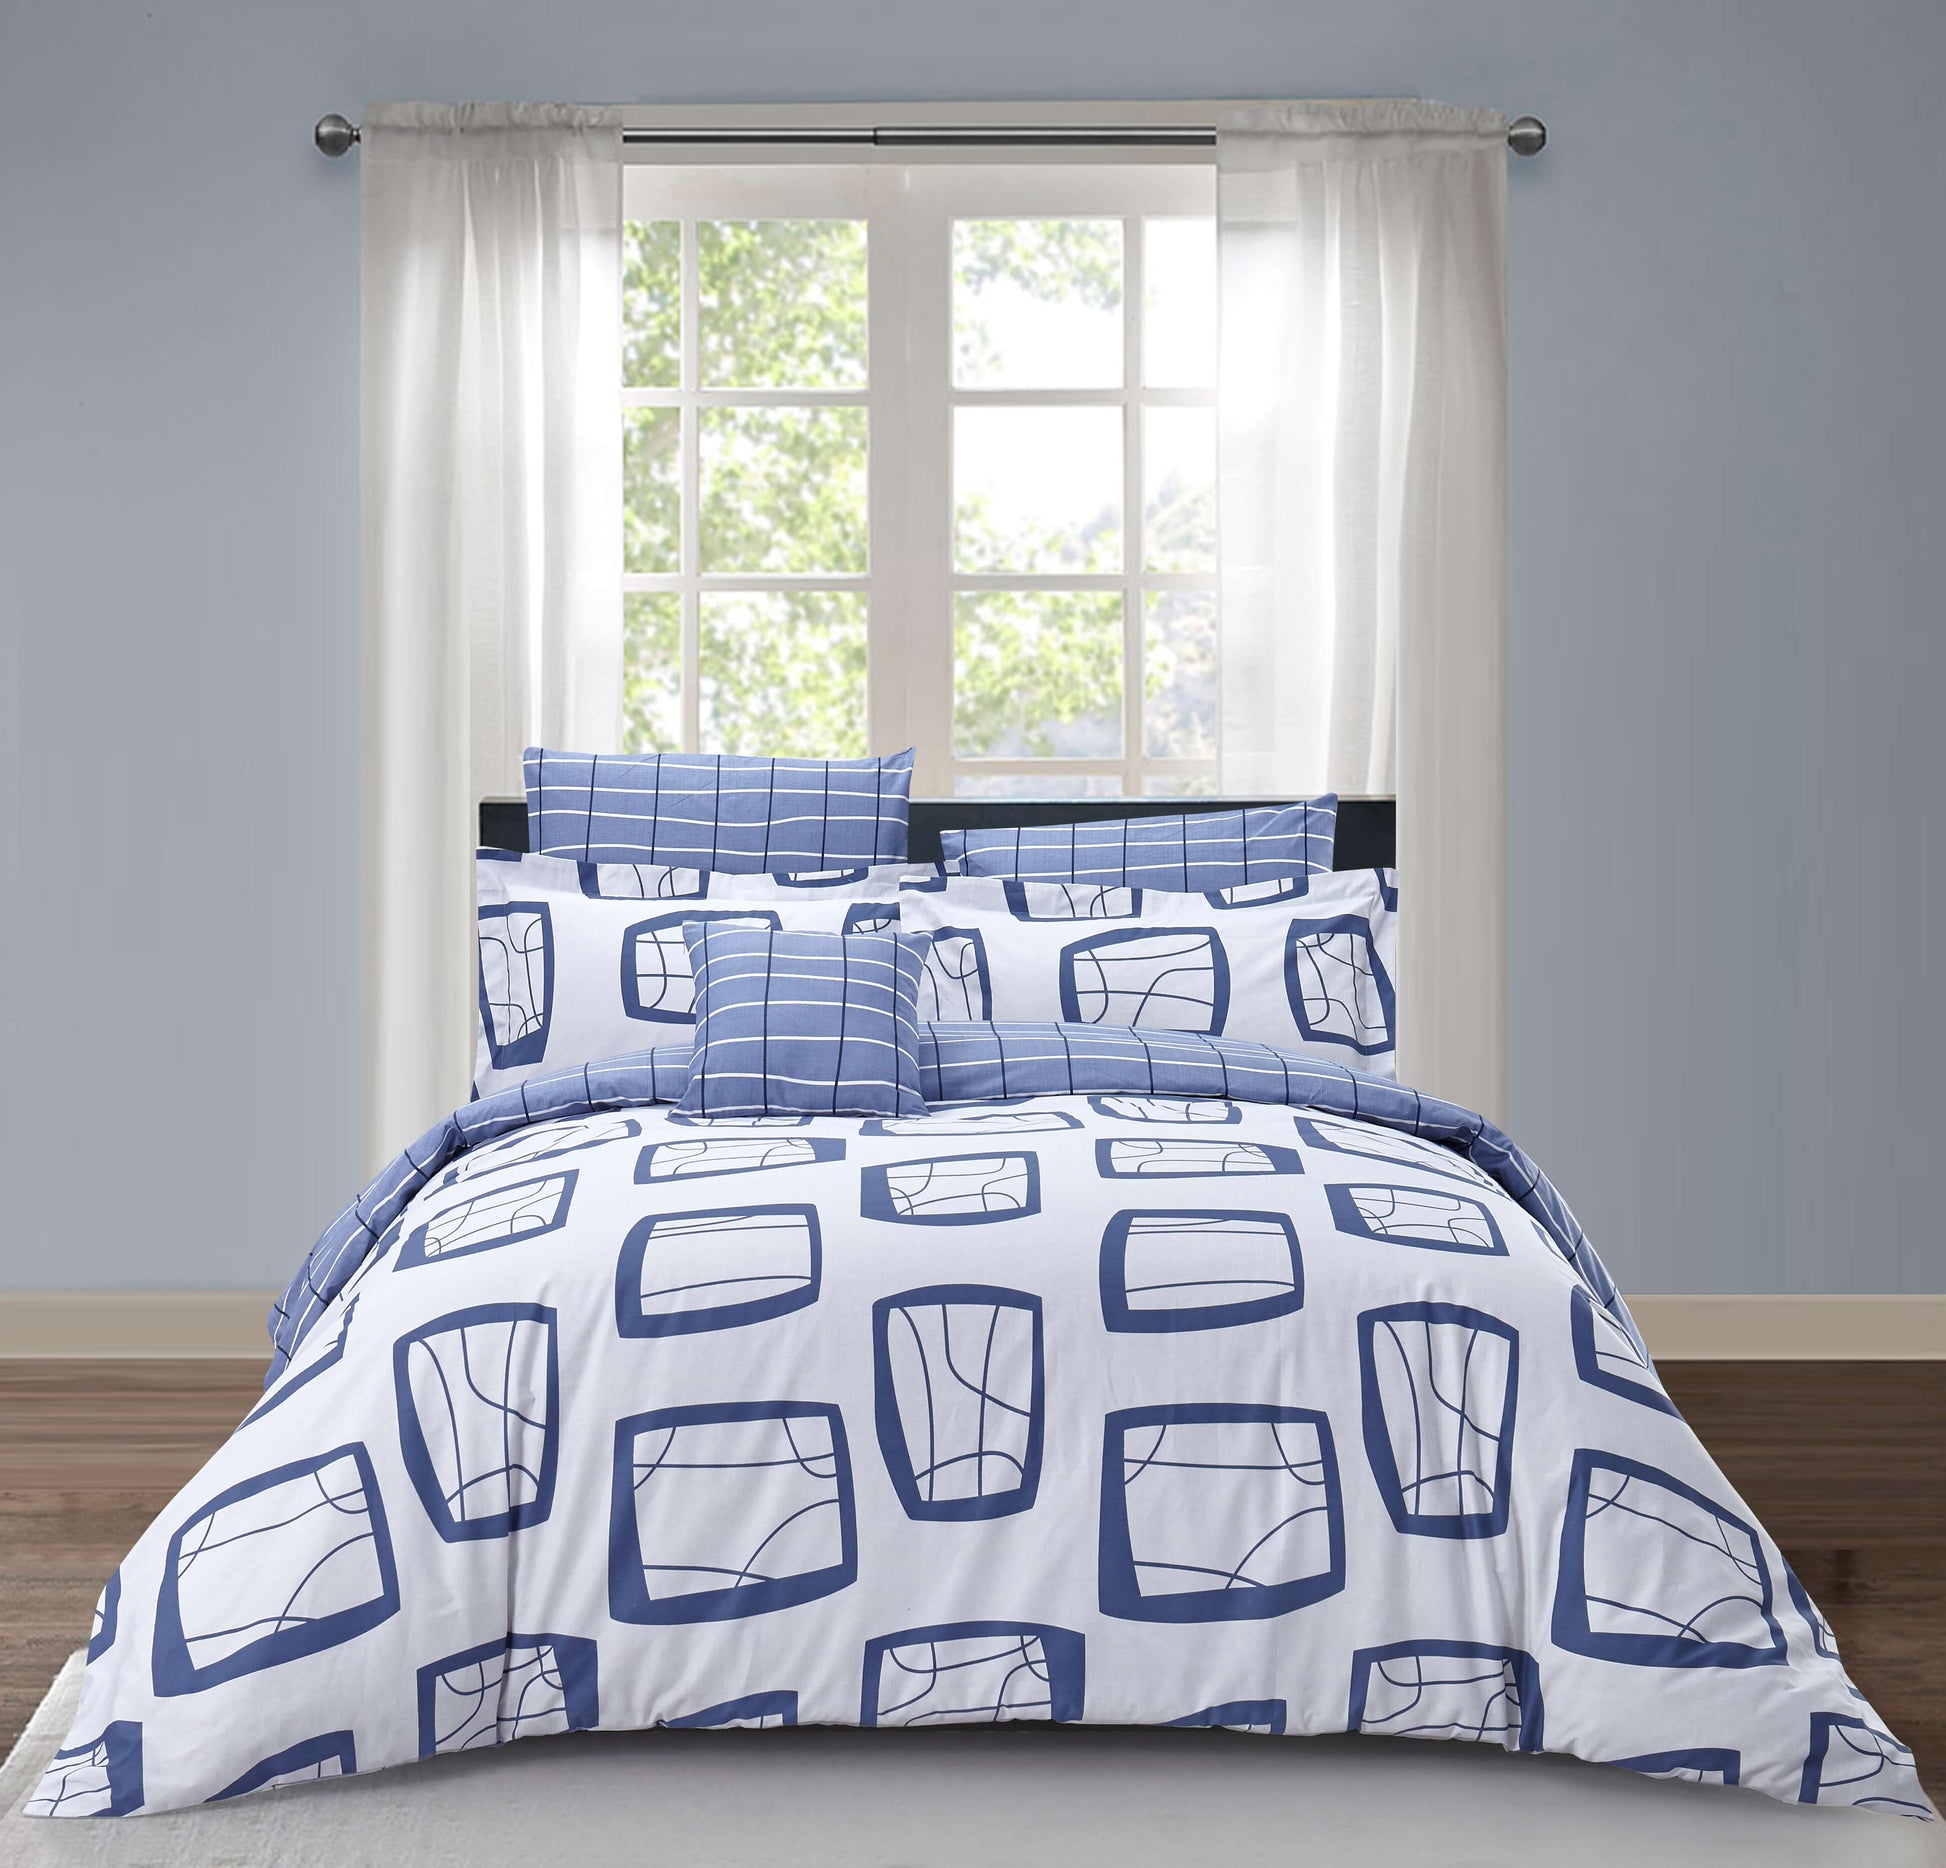 Penny Duvet Cover Set freeshipping - North Home